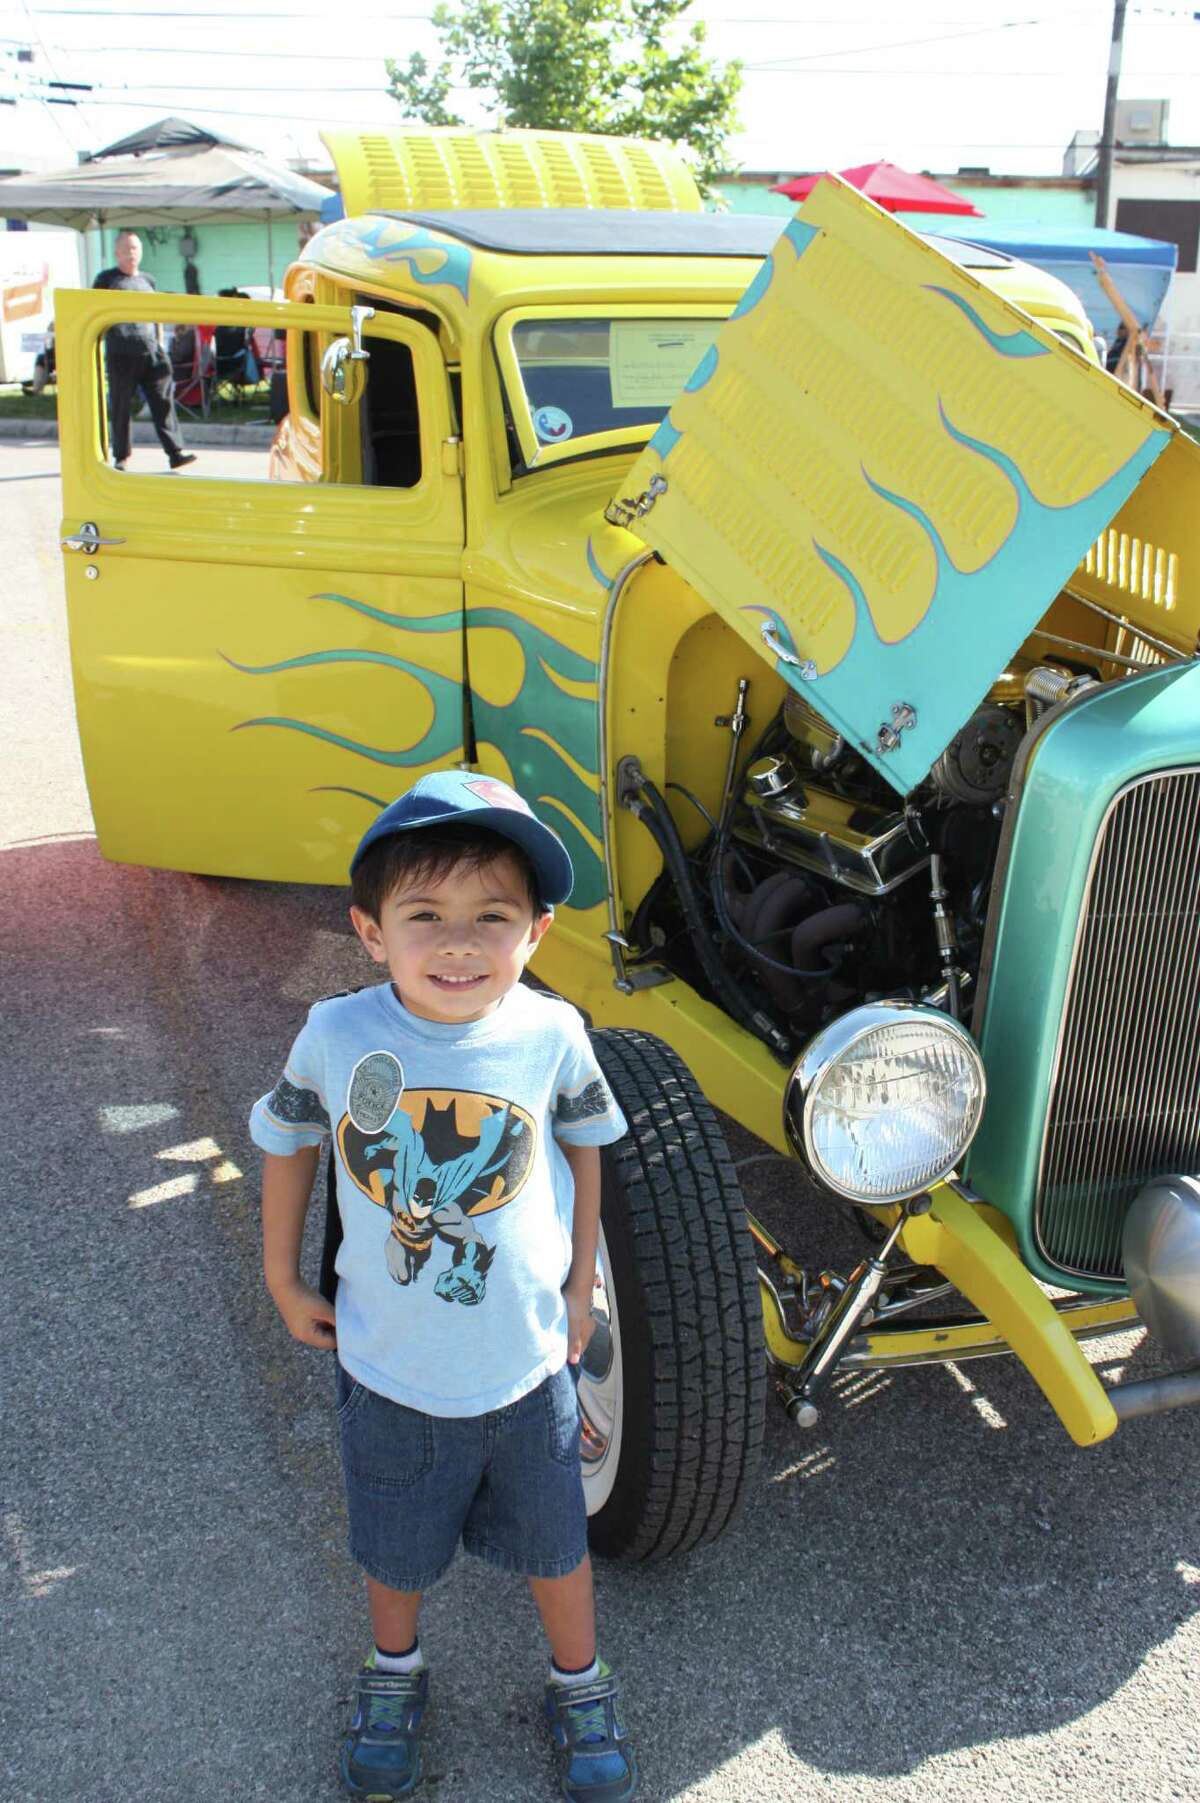 Car lovers turned out for lowriders and live music at the 33rd annual Lowrider Festival at Centro Cultural Aztlan on San Antonio's West Side on Sunday, May 3, 2015.